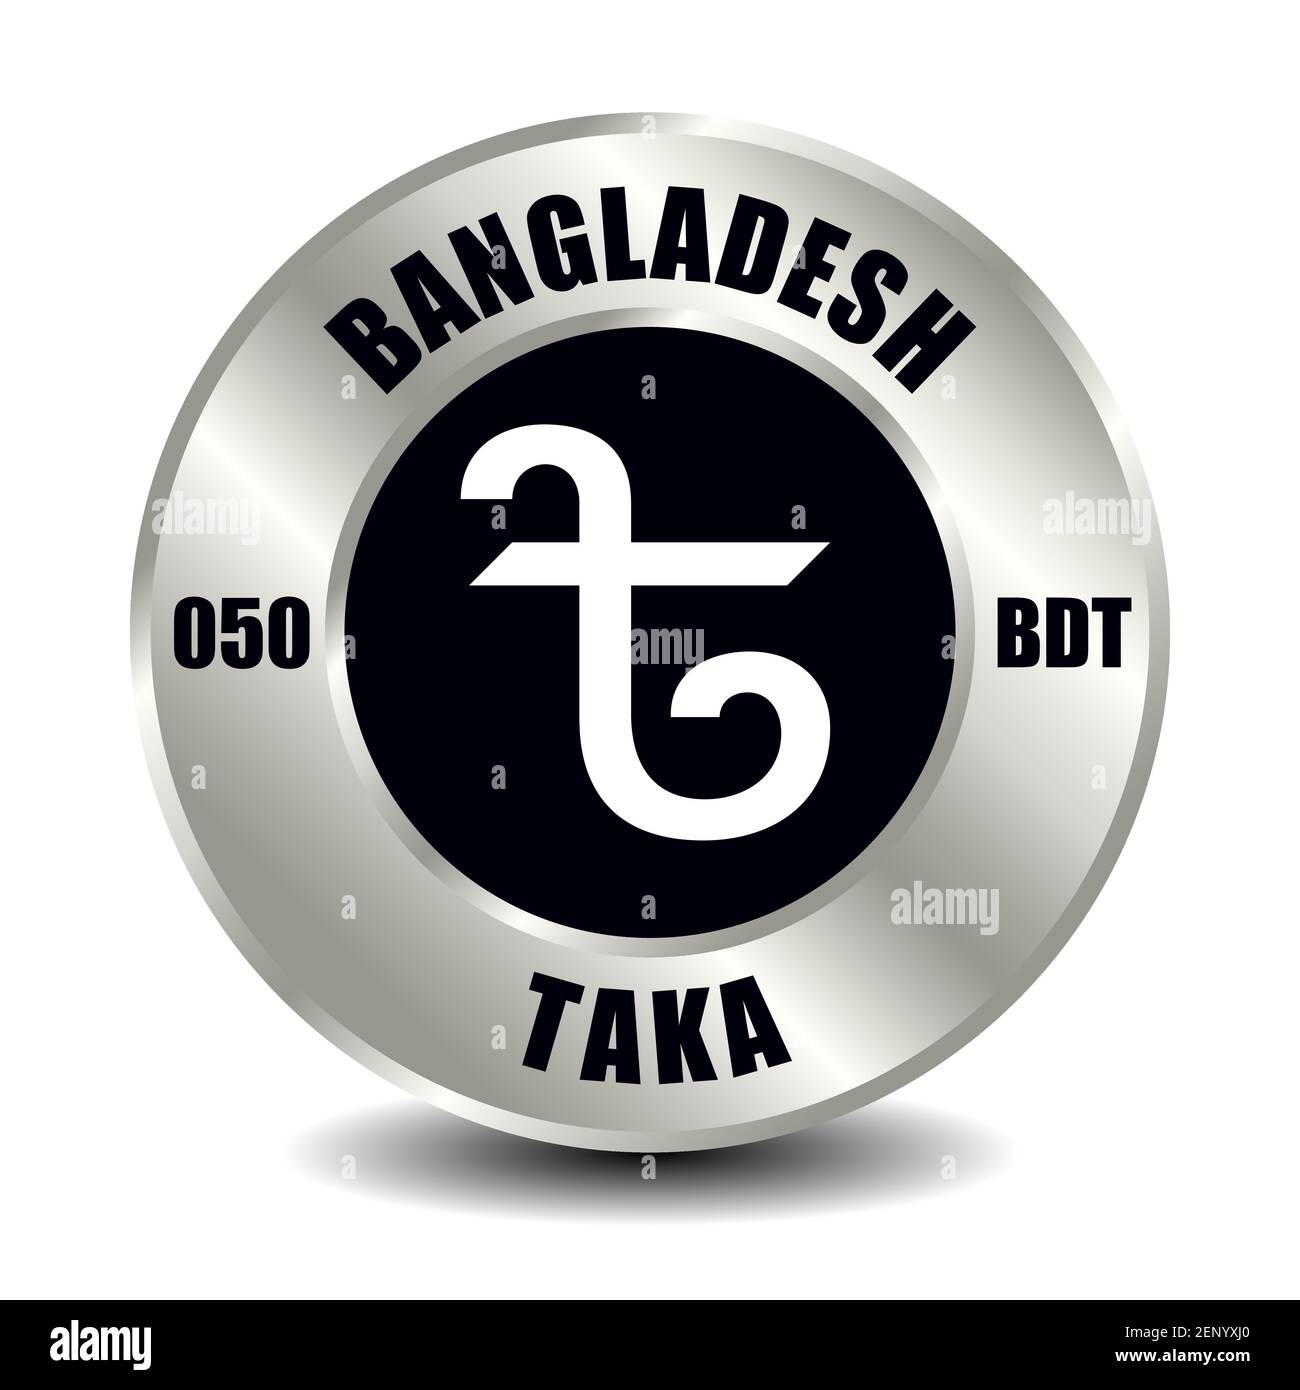 Bangladesh money icon isolated on round silver coin. Vector sign of currency symbol with international ISO code and abbreviation Stock Vector